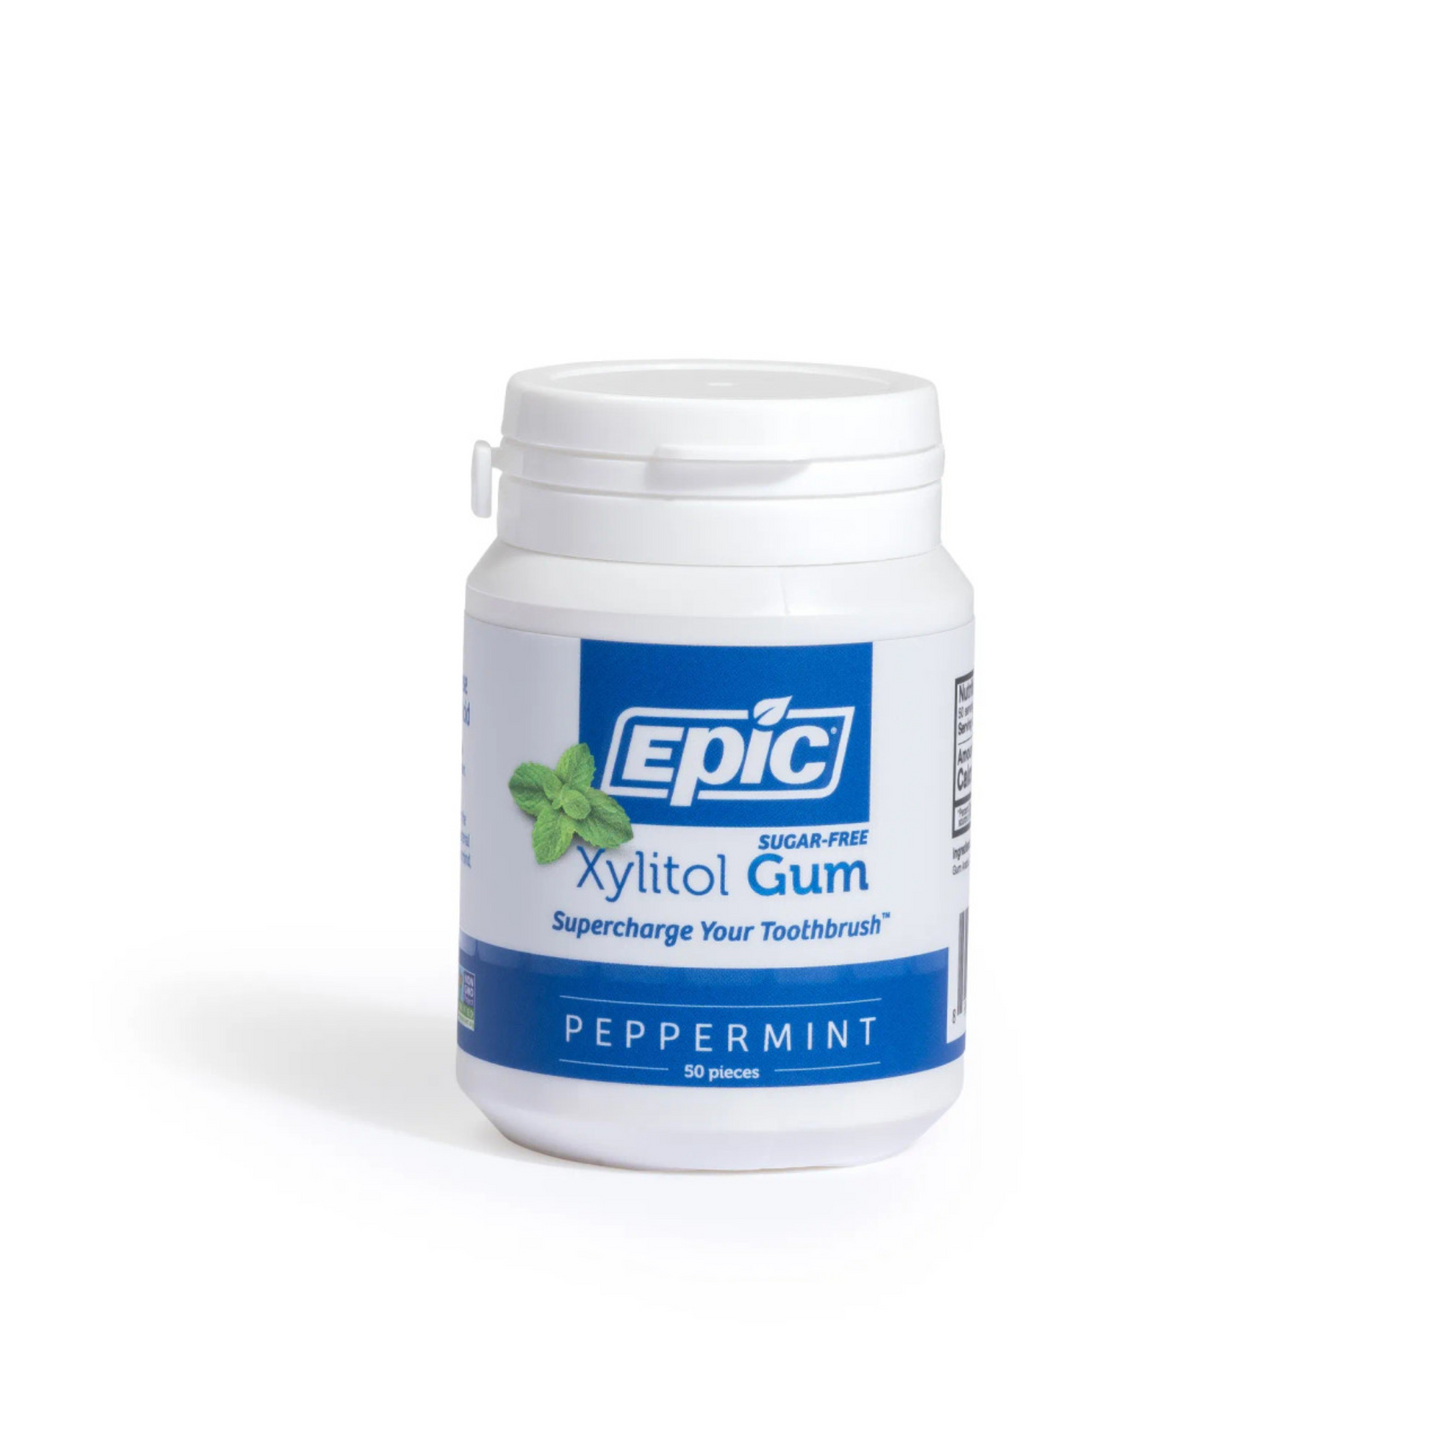 Epic Xylitol Chewing Gum 50 Pack, Peppermint Flavour